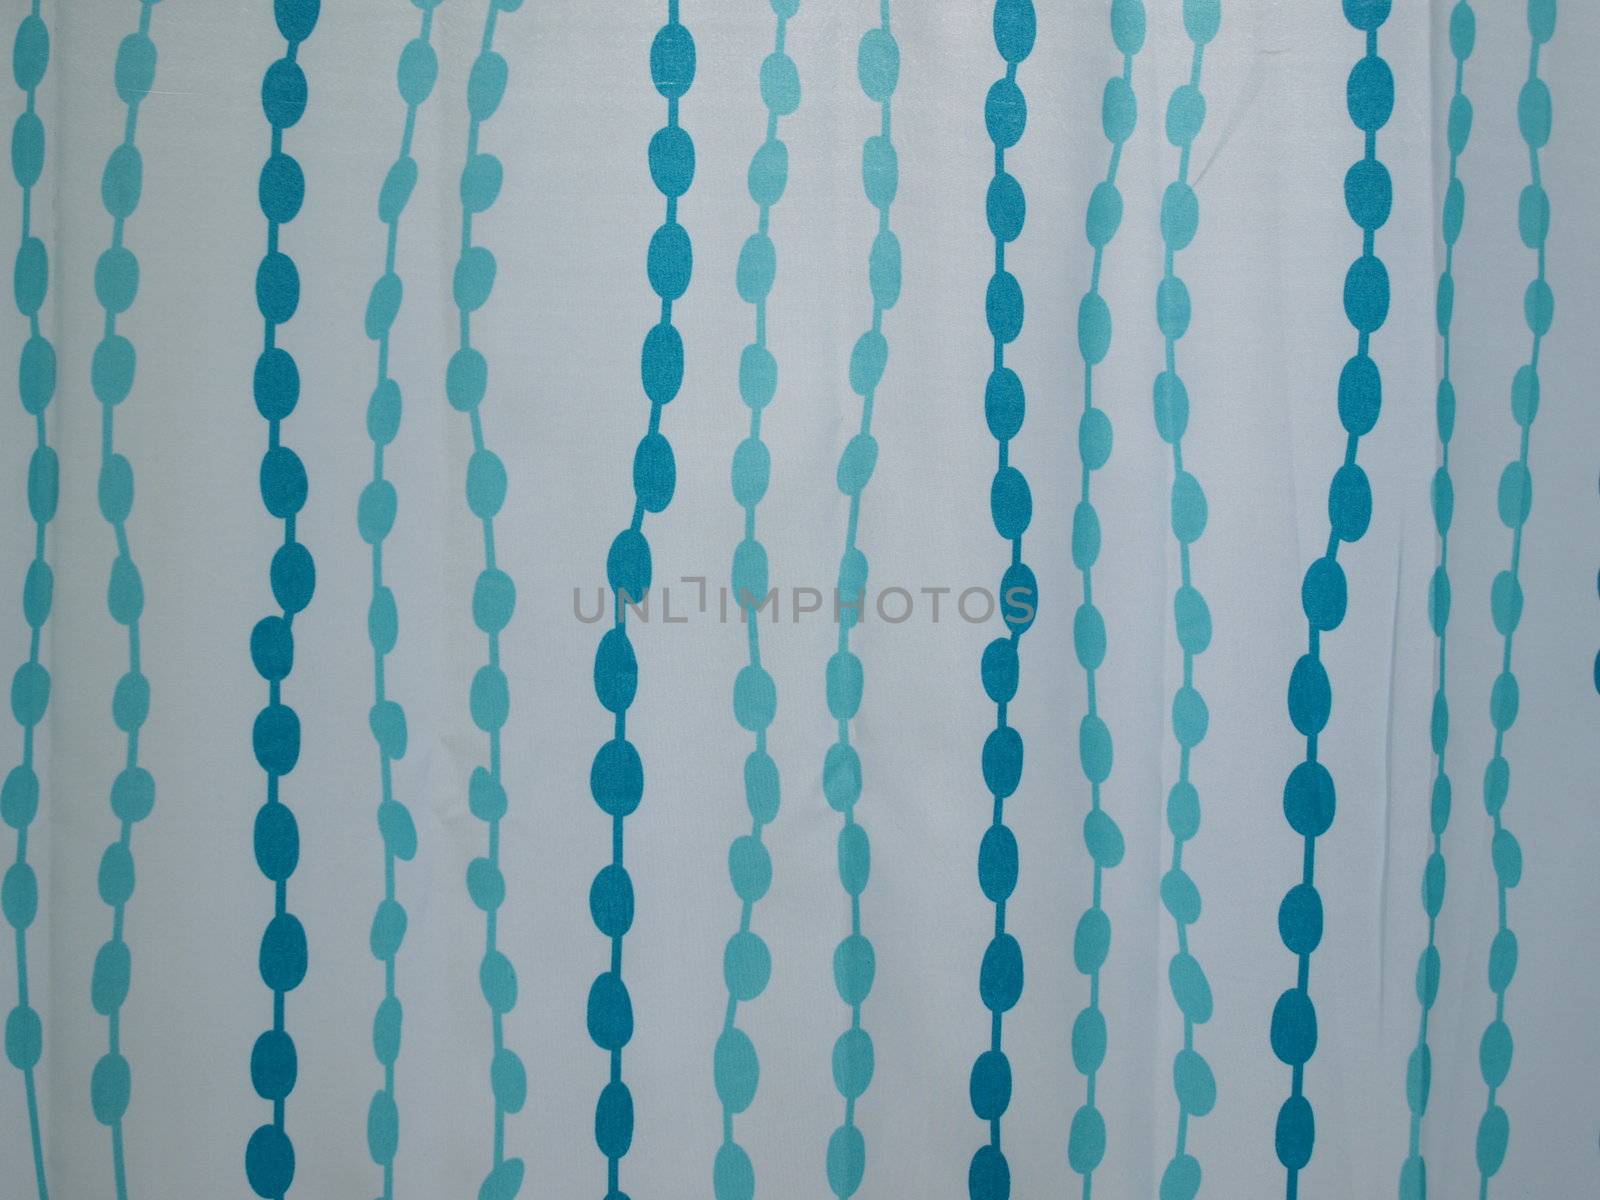 Shower curtain pattern in blues and green on white